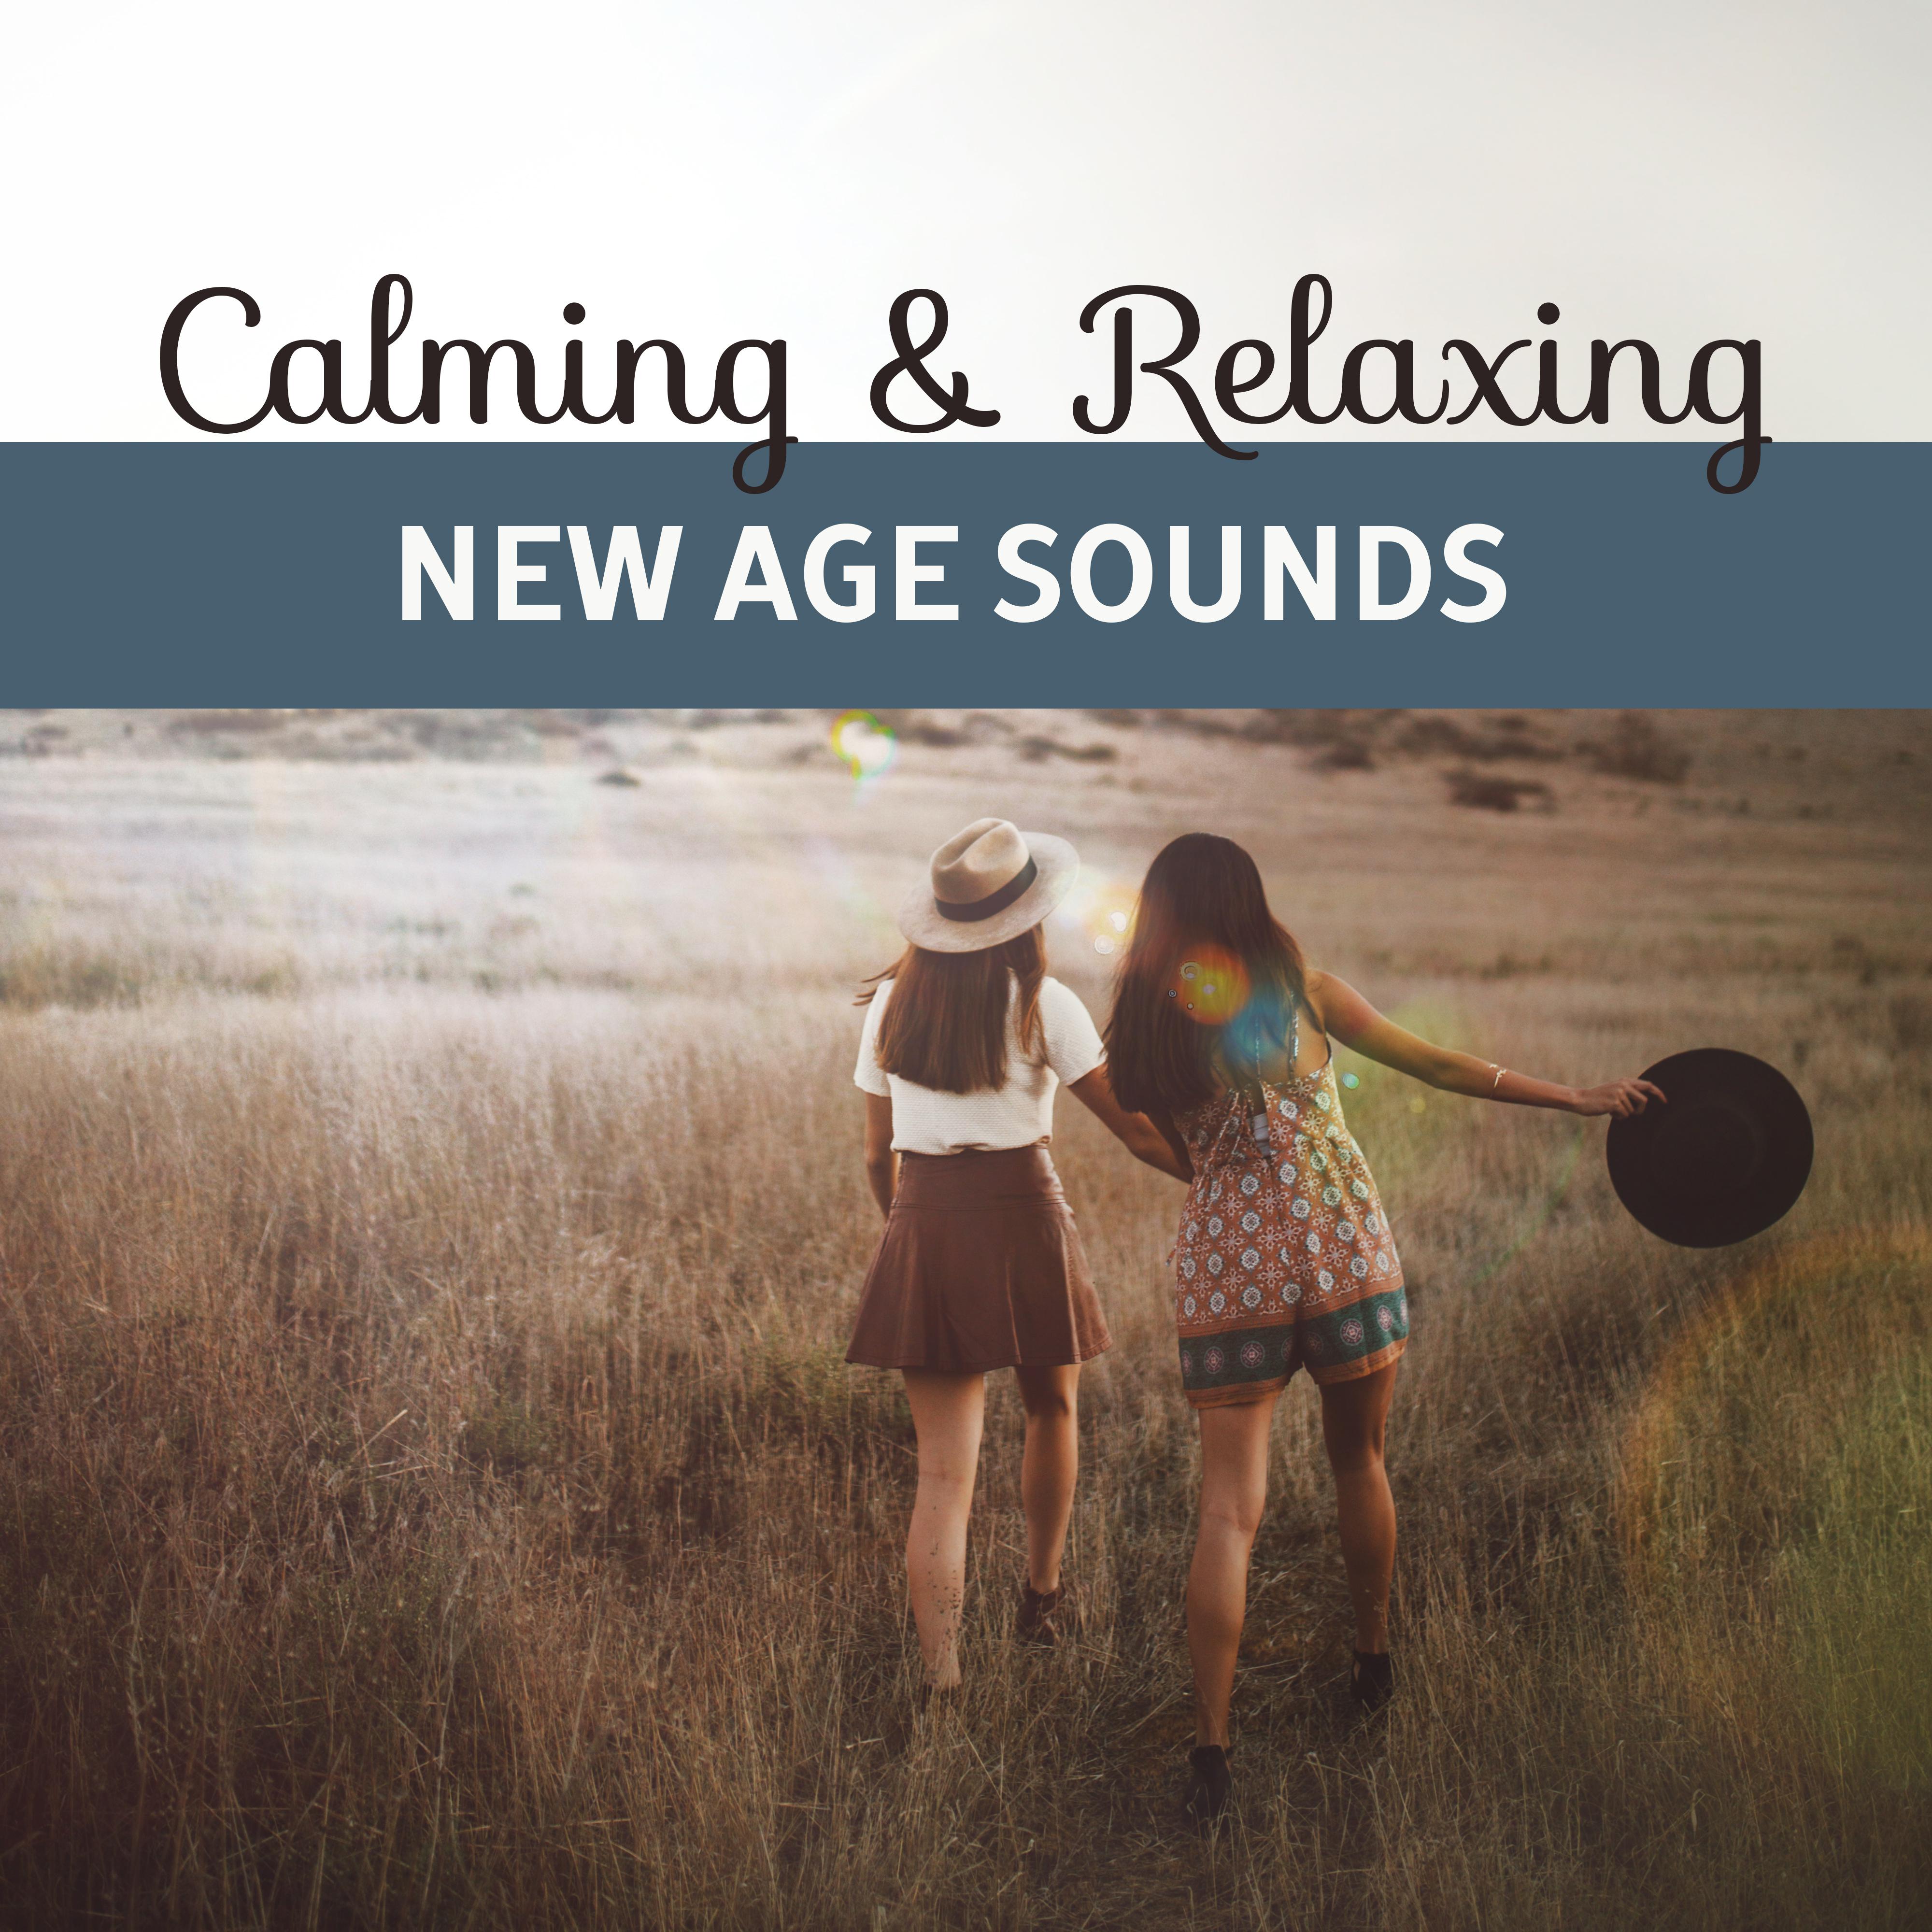 Calming & Relaxing New Age Sounds – Music for Mind Relaxation, Inner Silence, Soothing Waves, Peaceful Sounds